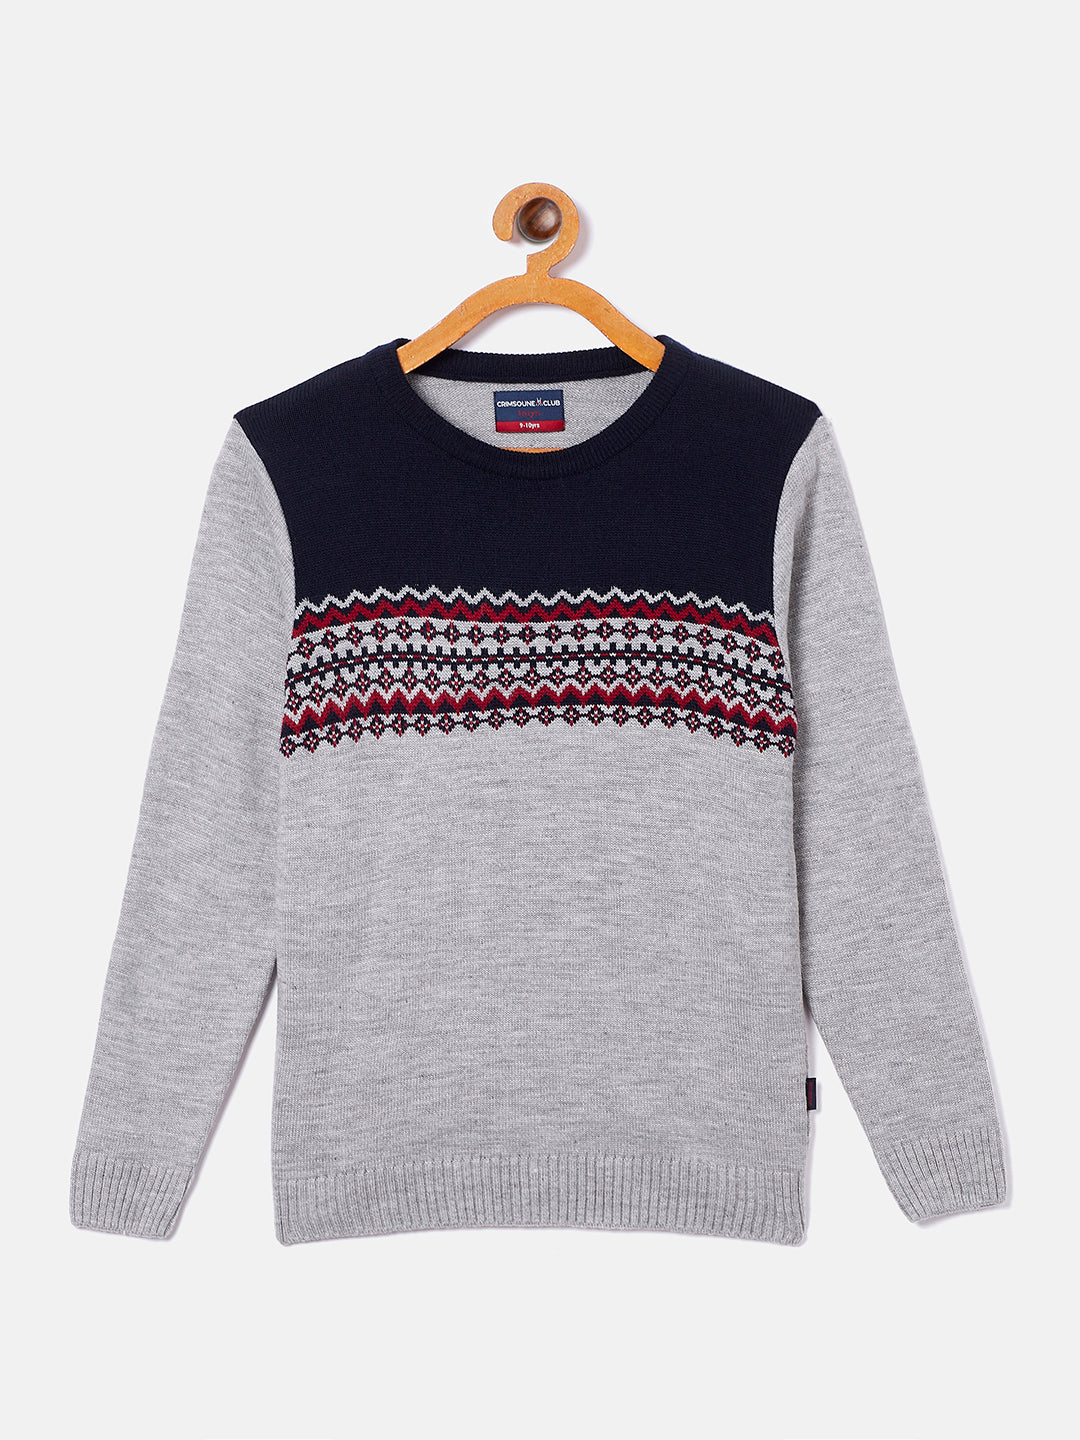 Grey Colorblocked Round Neck Sweater - Boys Sweaters